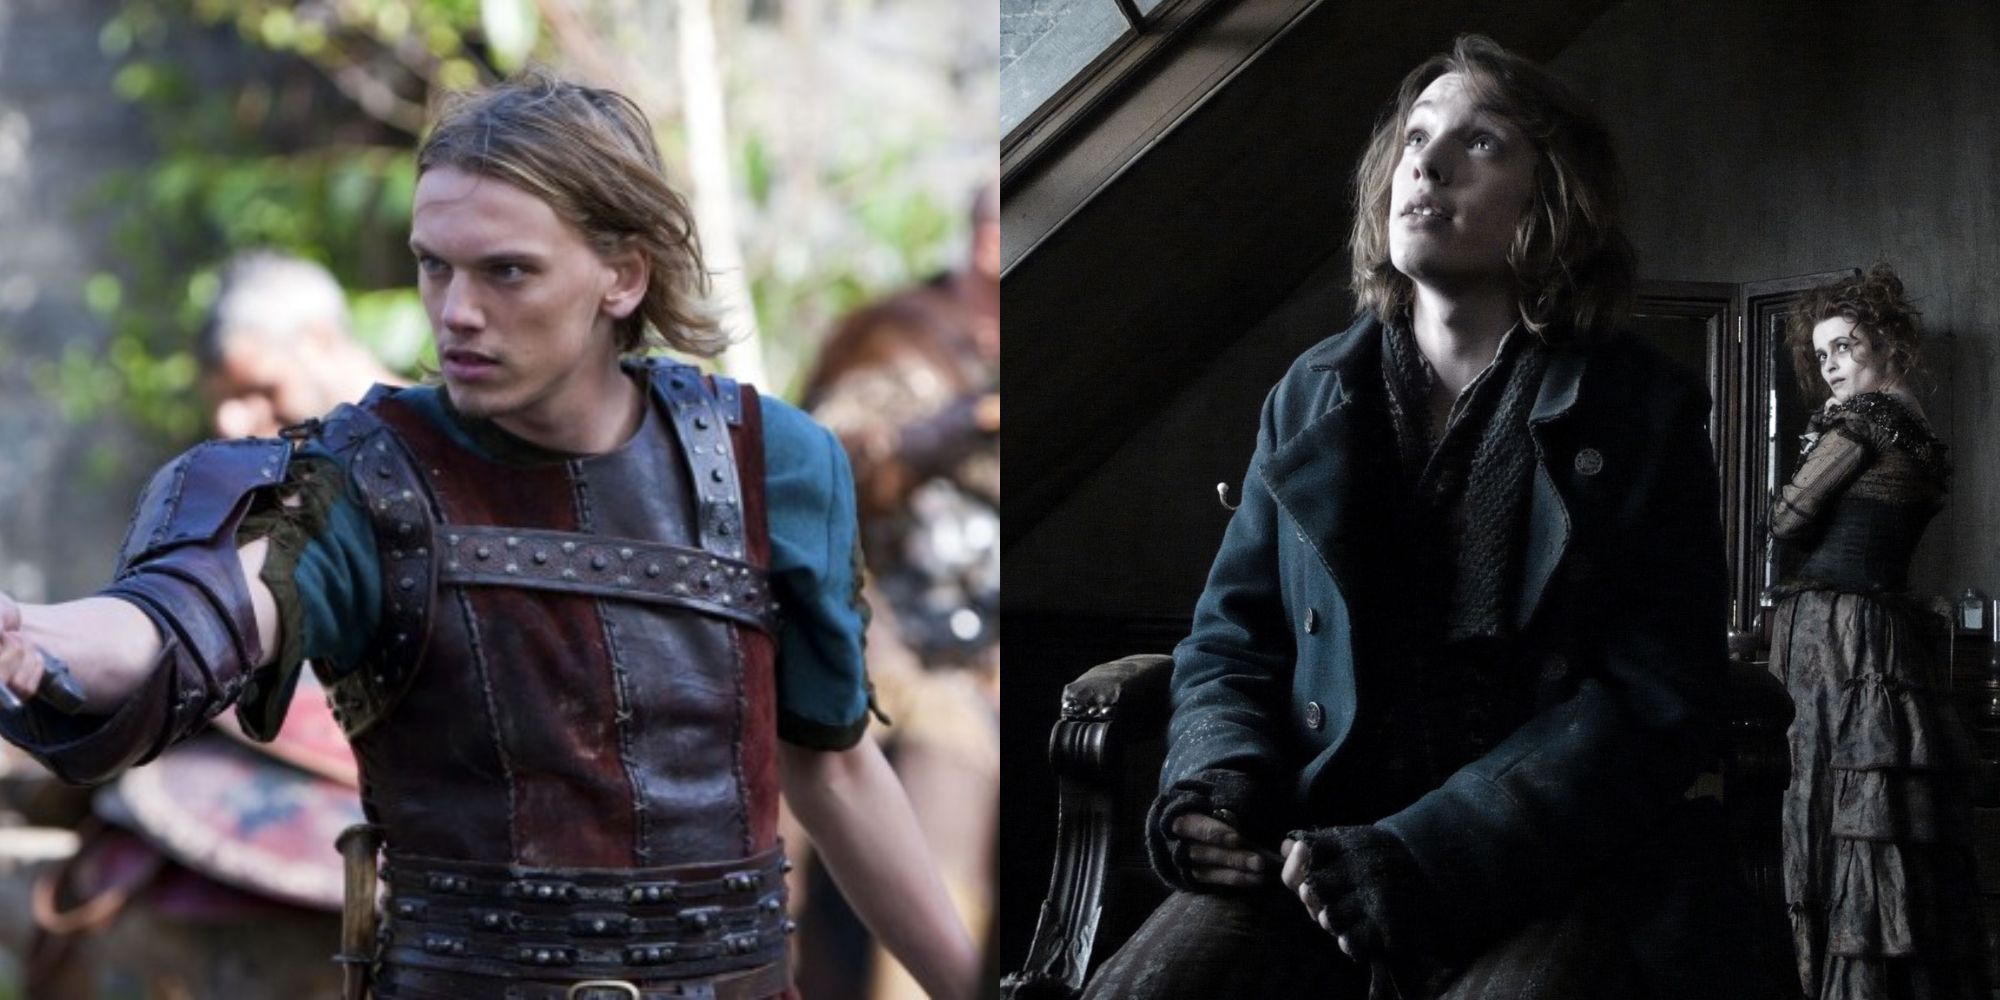 Split image showing Jamie Campbell Bower in Camelot and Sweeney Todd.